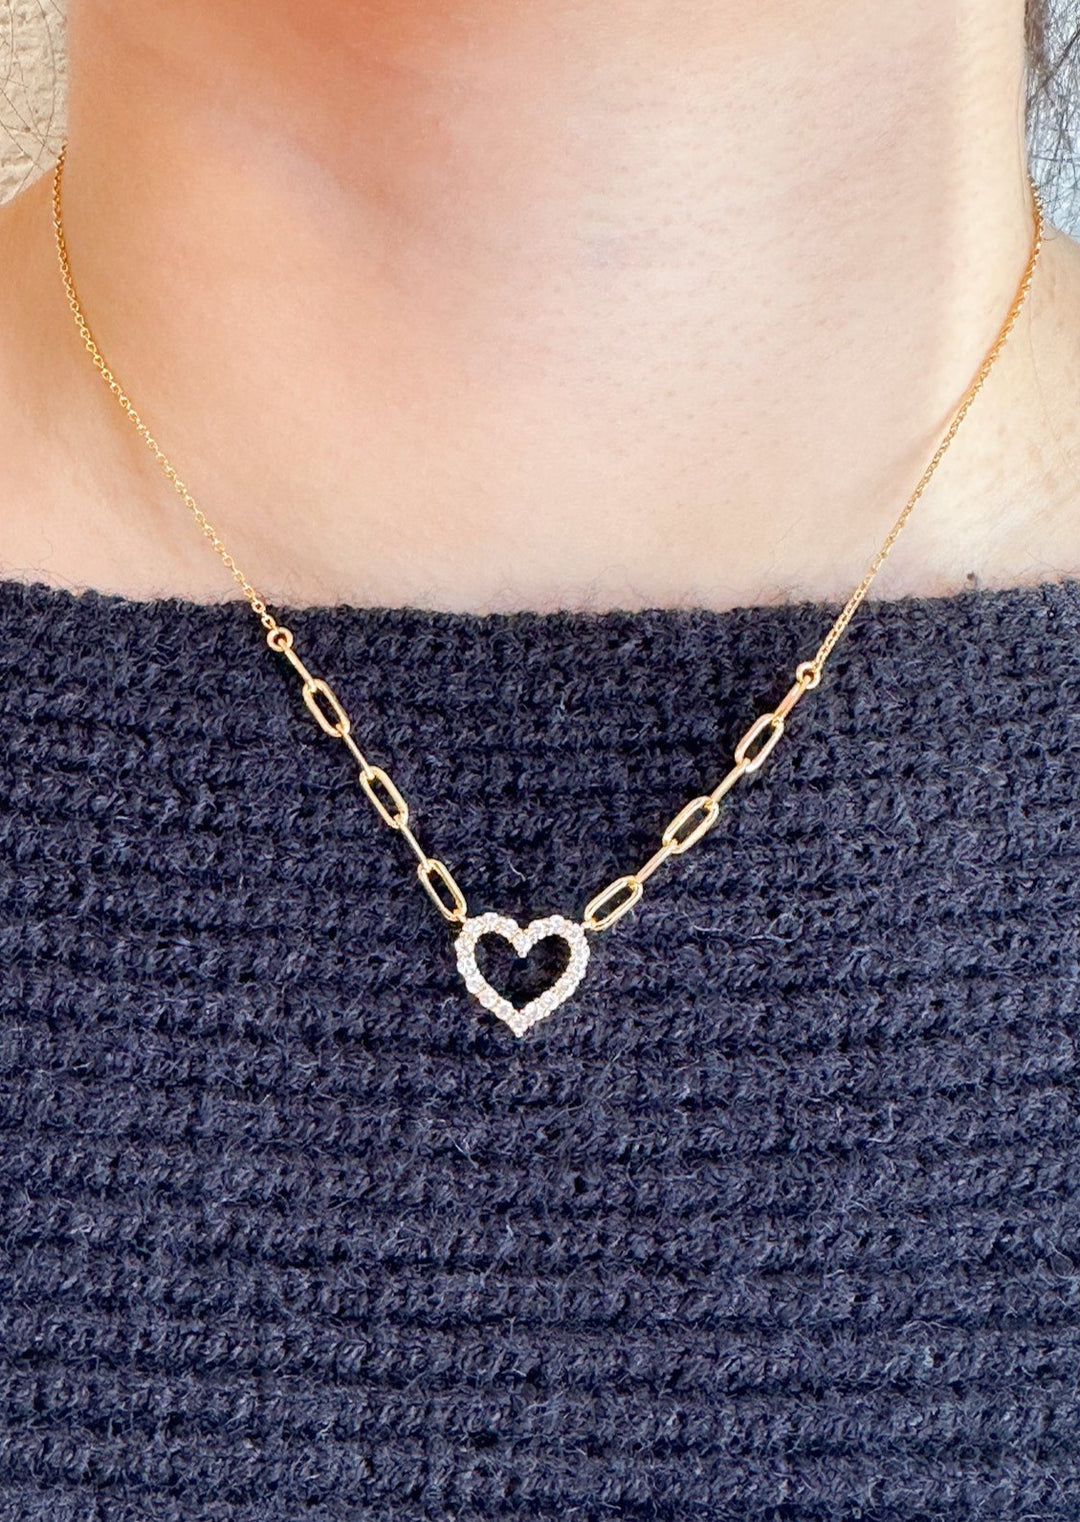 CZ Heart Gold Chain Necklace, Jewelry, Adeline, Adeline, dallas boutique, dallas texas, texas boutique, women's boutique dallas, adeline boutique, dallas boutique, trendy boutique, affordable boutique